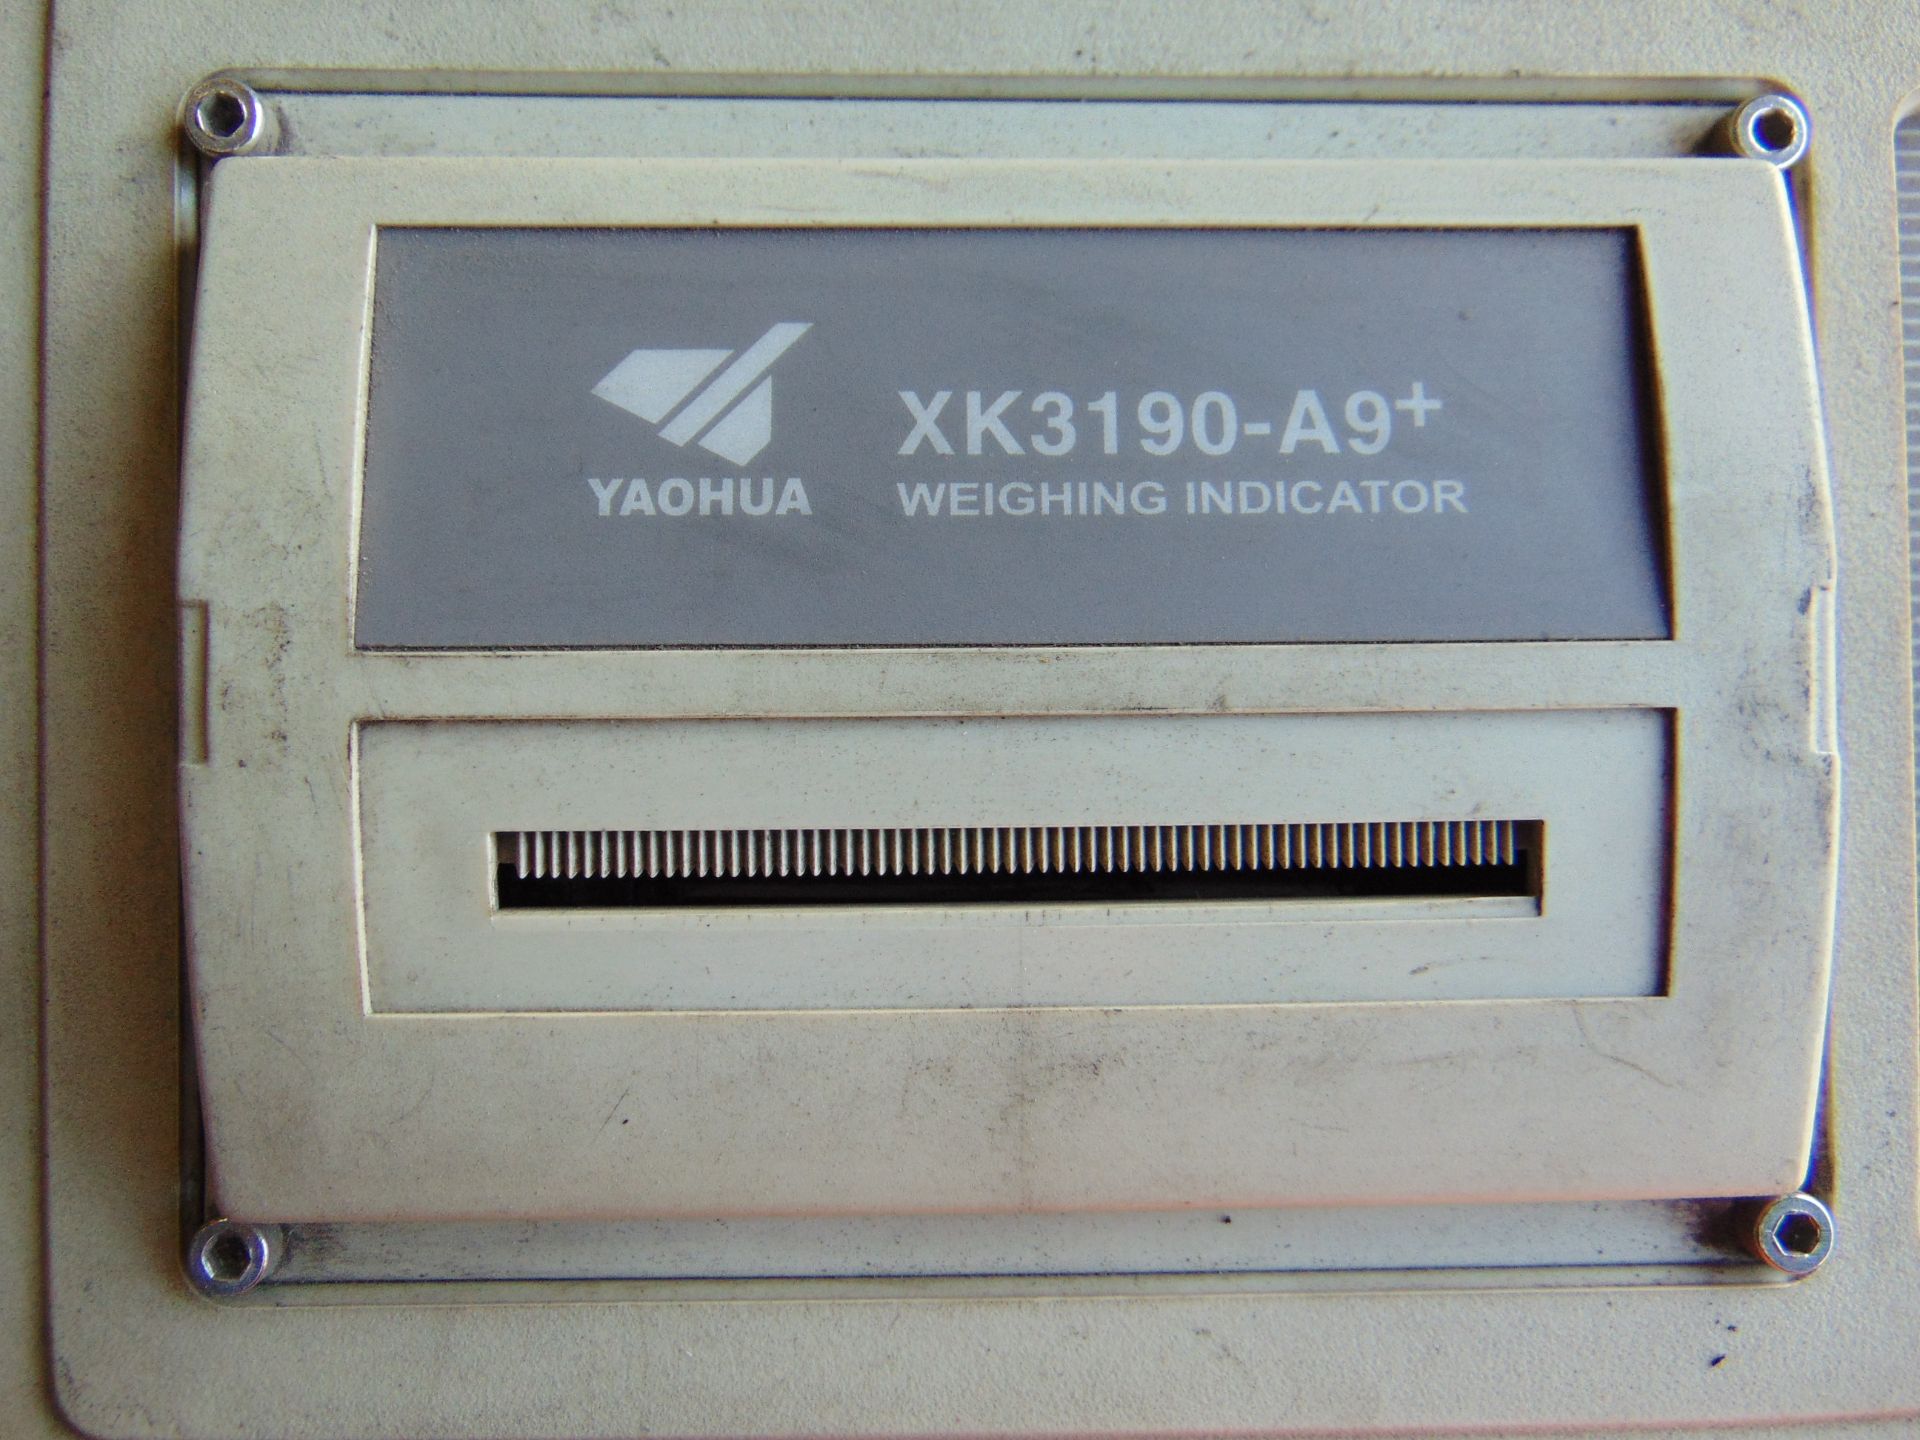 Yaohua XK3190-A9+ Pallet Weighing Machine w/ Print Out - Image 5 of 7